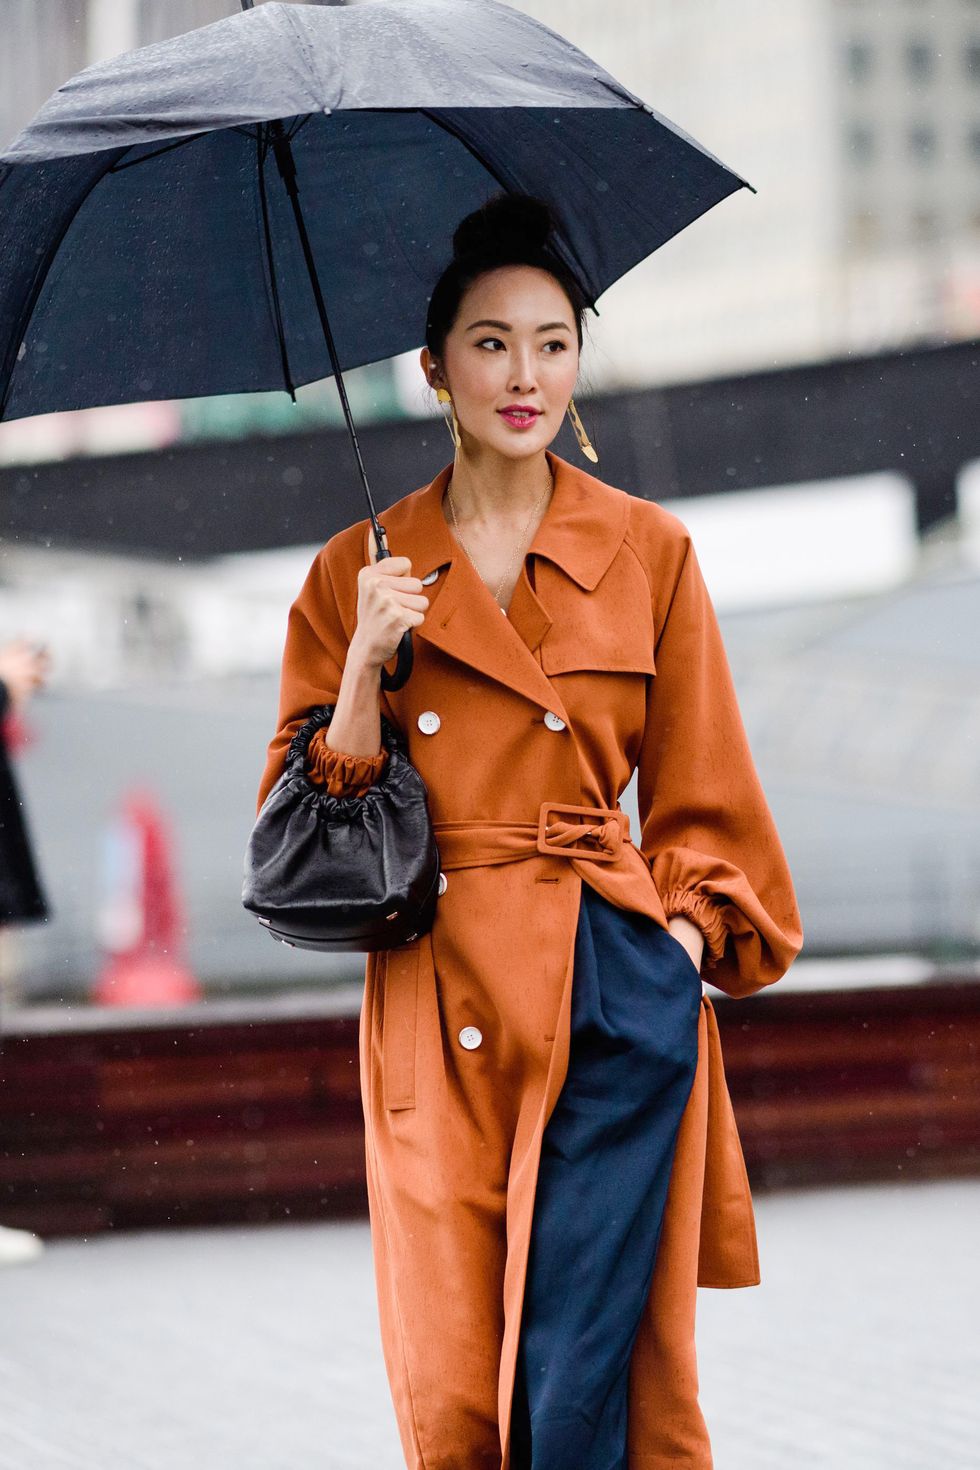 12 Cute Rainy Day Outfit Ideas 2018 - What To Wear In The Rain